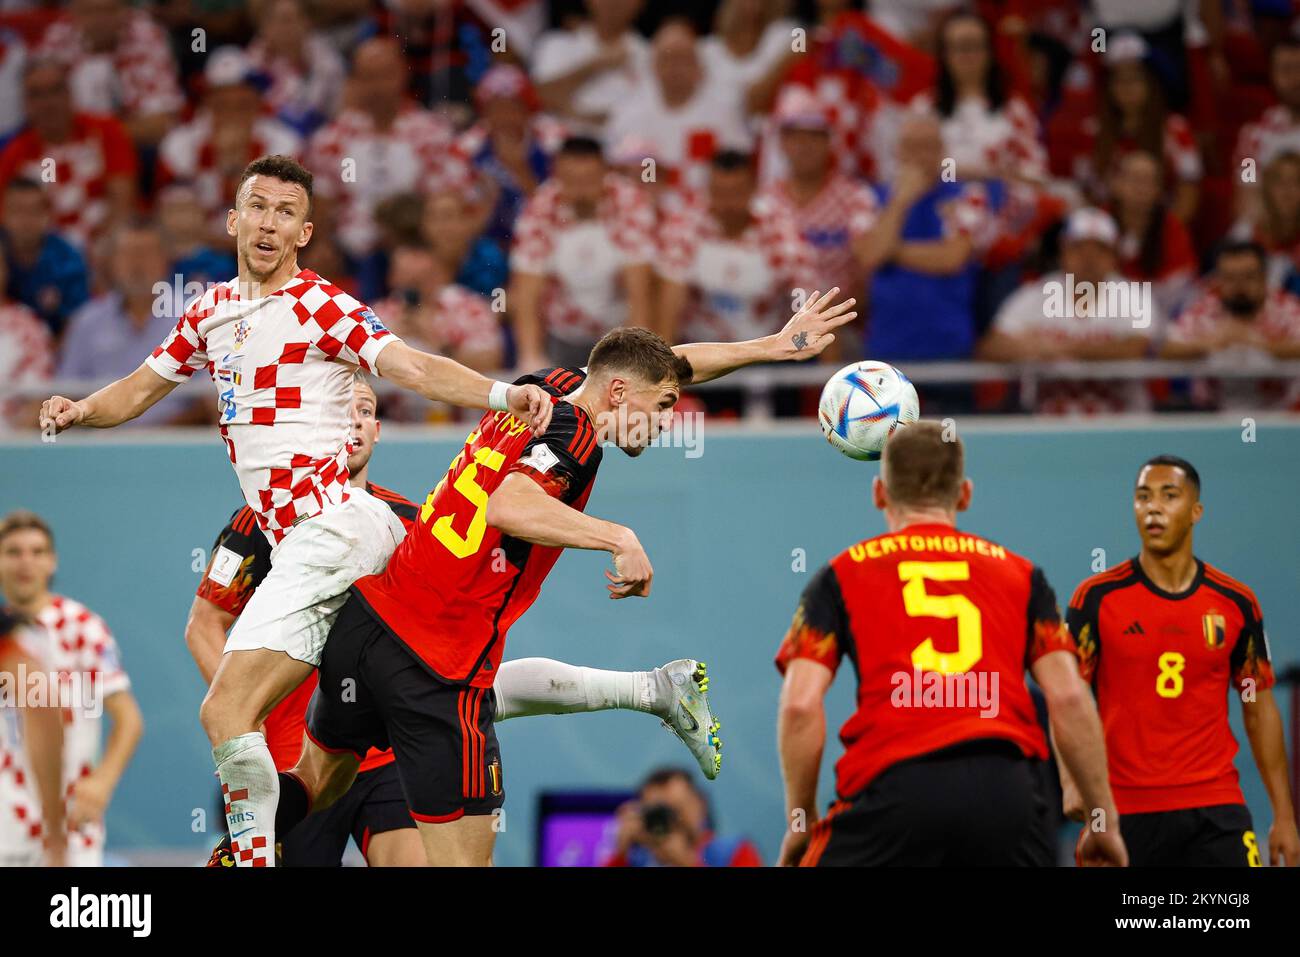 Doha, Catar. 01st Dec, 2022. PERISIC Ivan from Croatia and MEUNIER Thomas from Belgium during a match between Tunisia and France, valid for the group stage of the World Cup, held at the Education City Stadium in Doha, Qatar. Credit: Rodolfo Buhrer/La Imagem/FotoArena/Alamy Live News Stock Photo